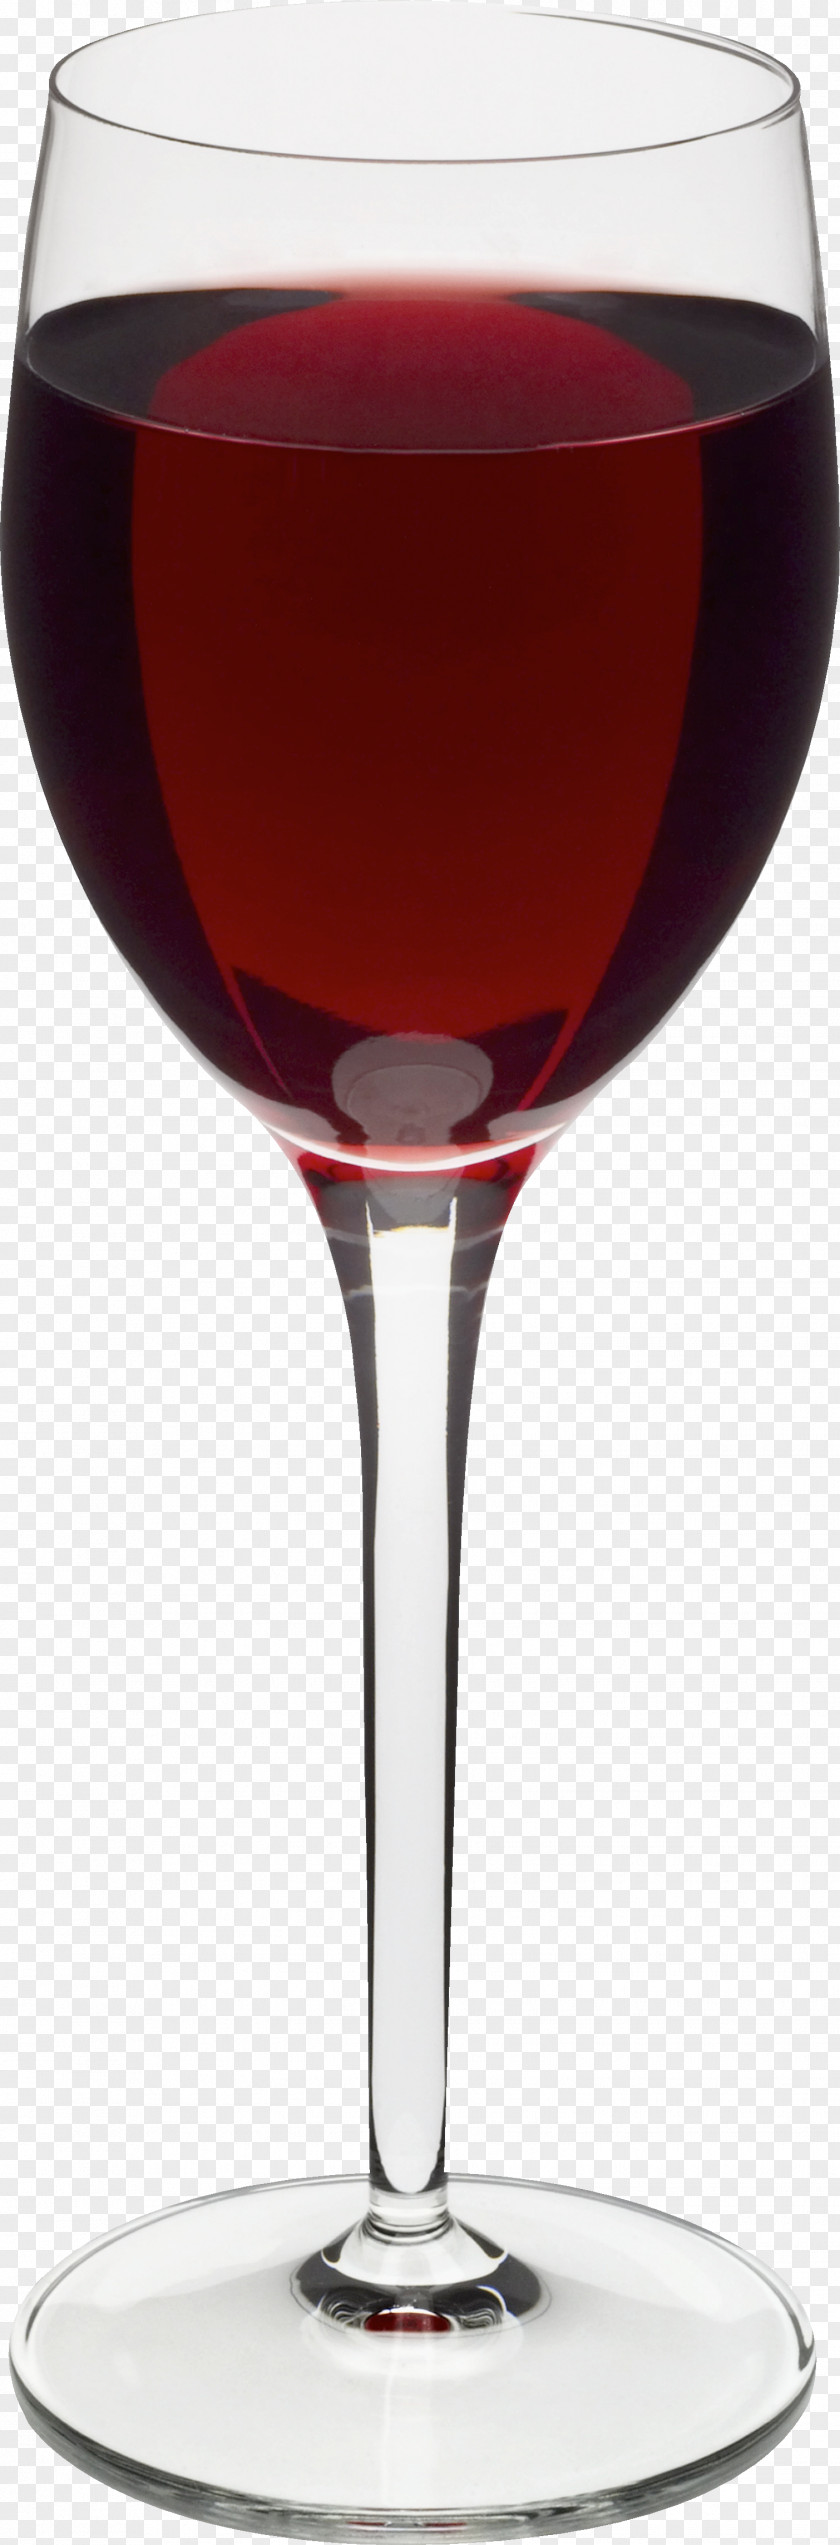 Glass Image Red Wine White PNG